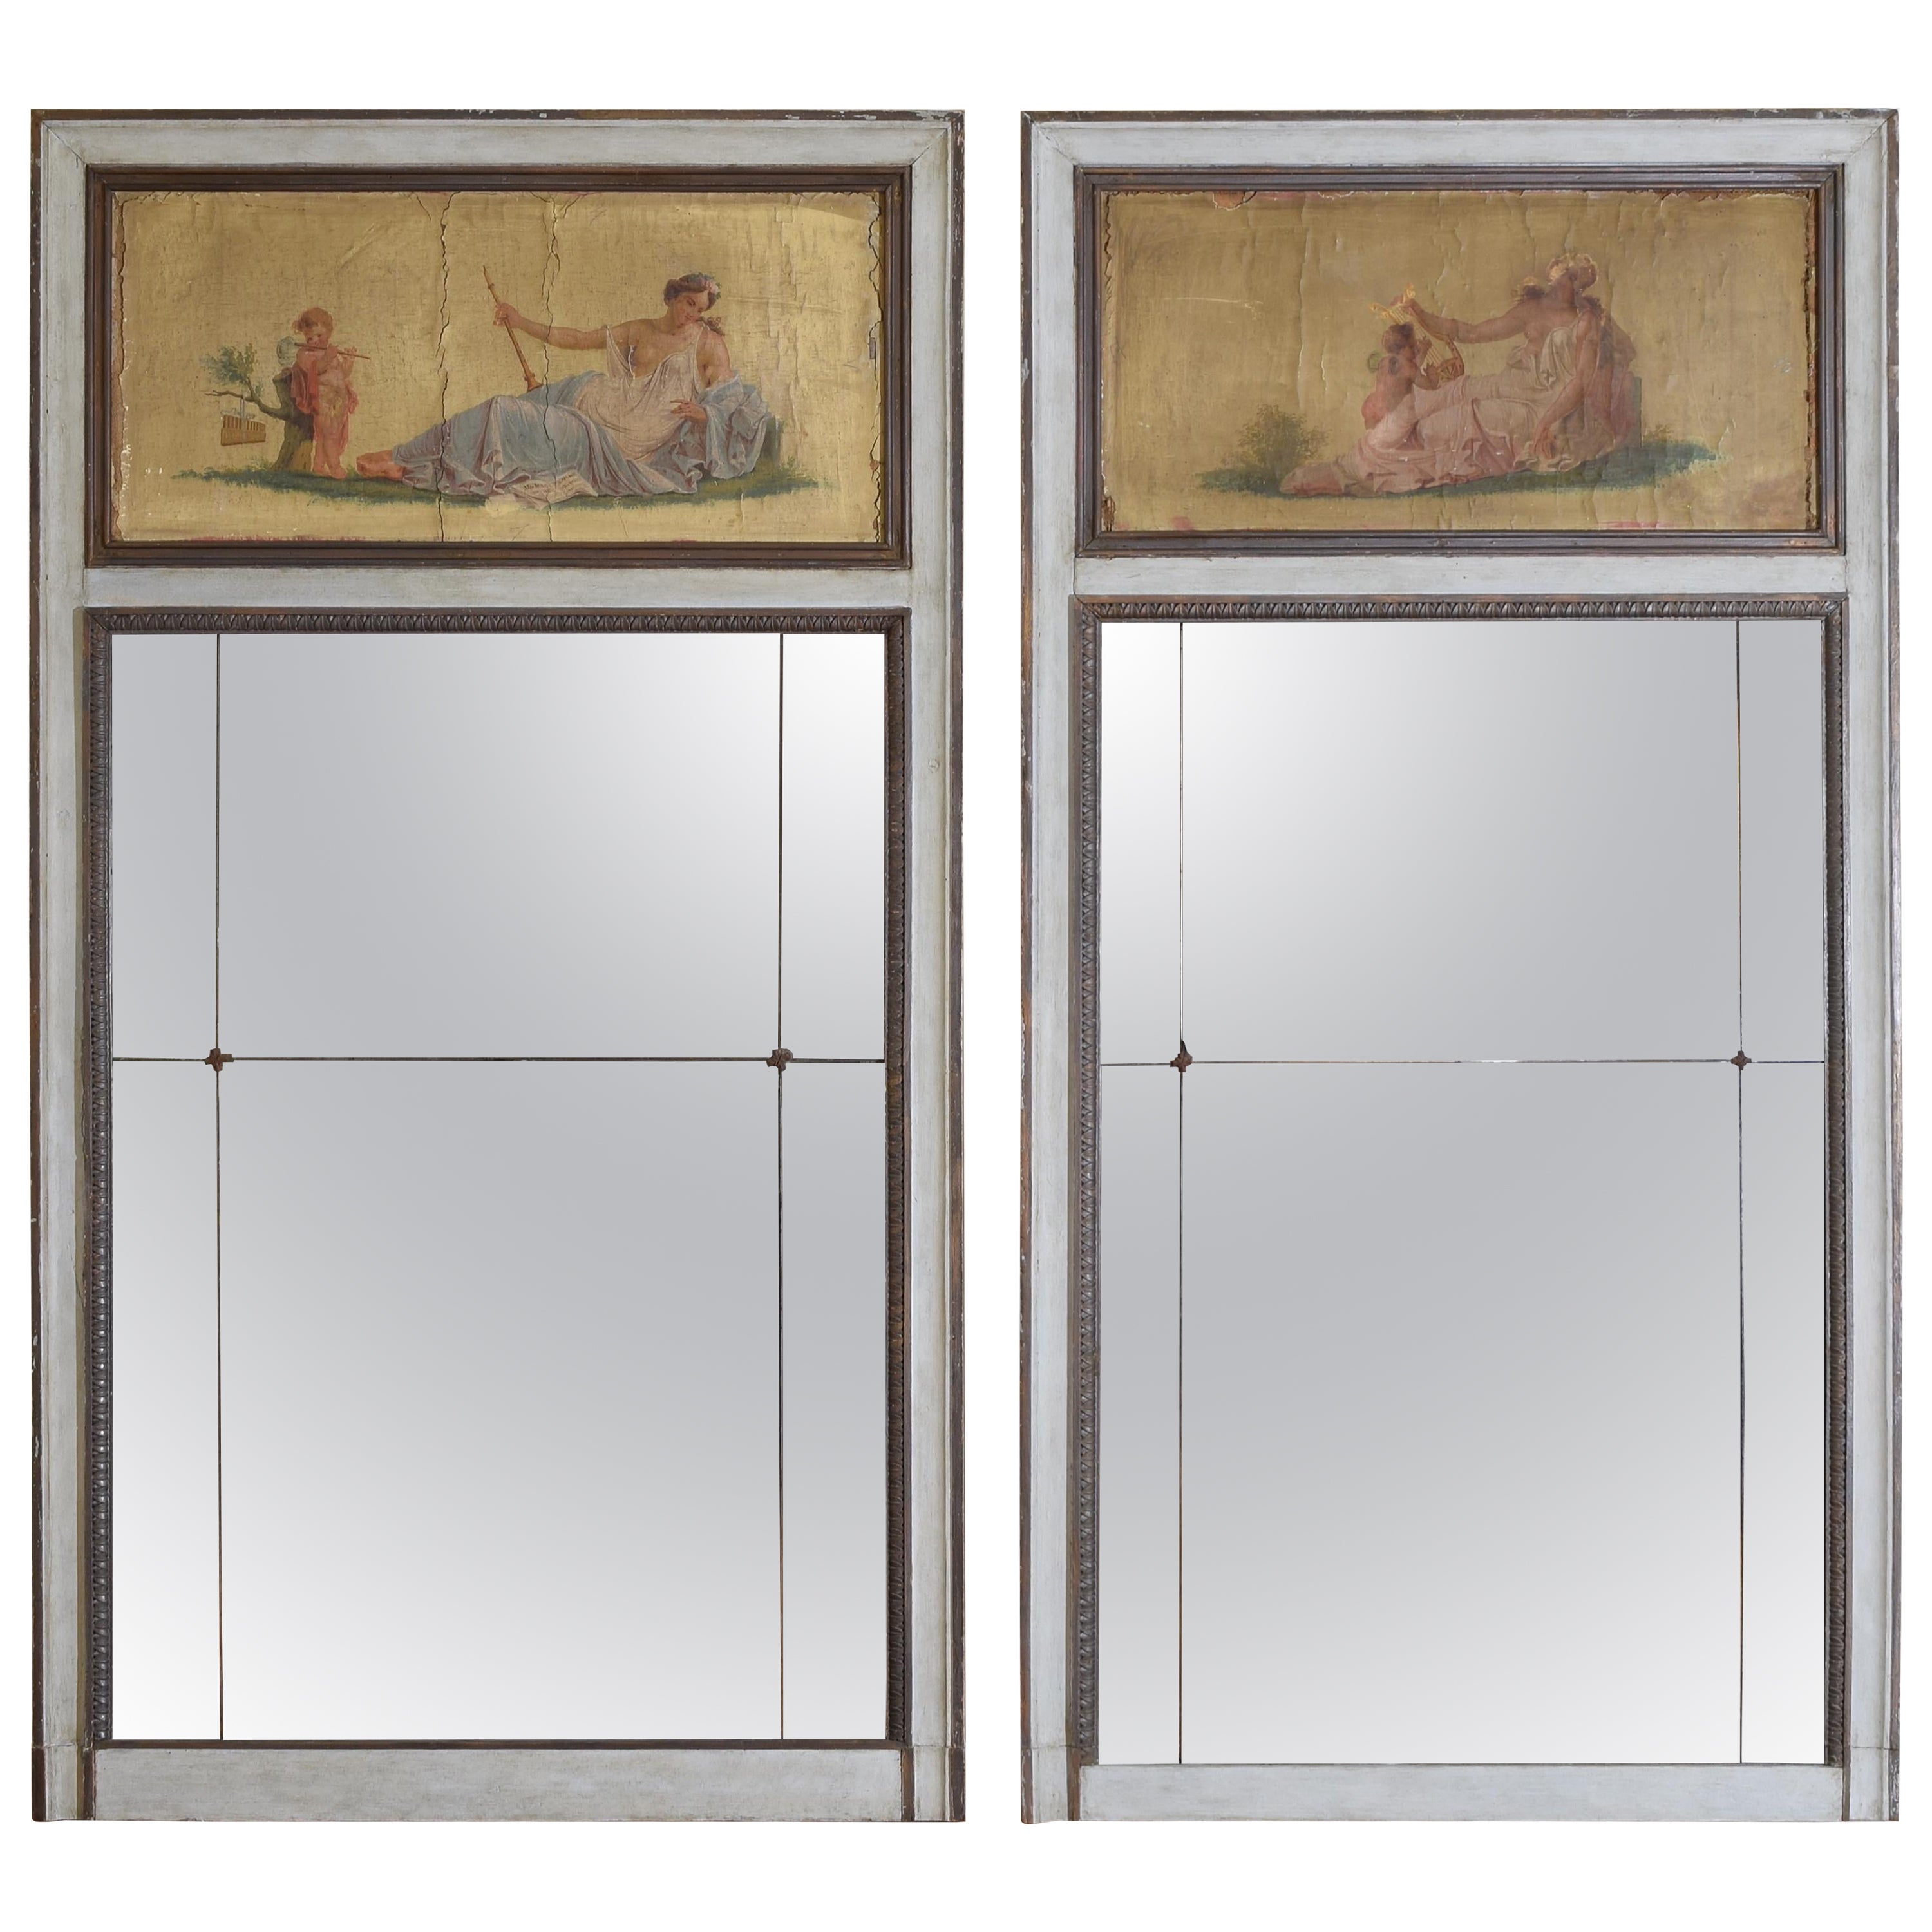 Pair French Neoclassic Painted Trumeau Mirrors, mid 19th century